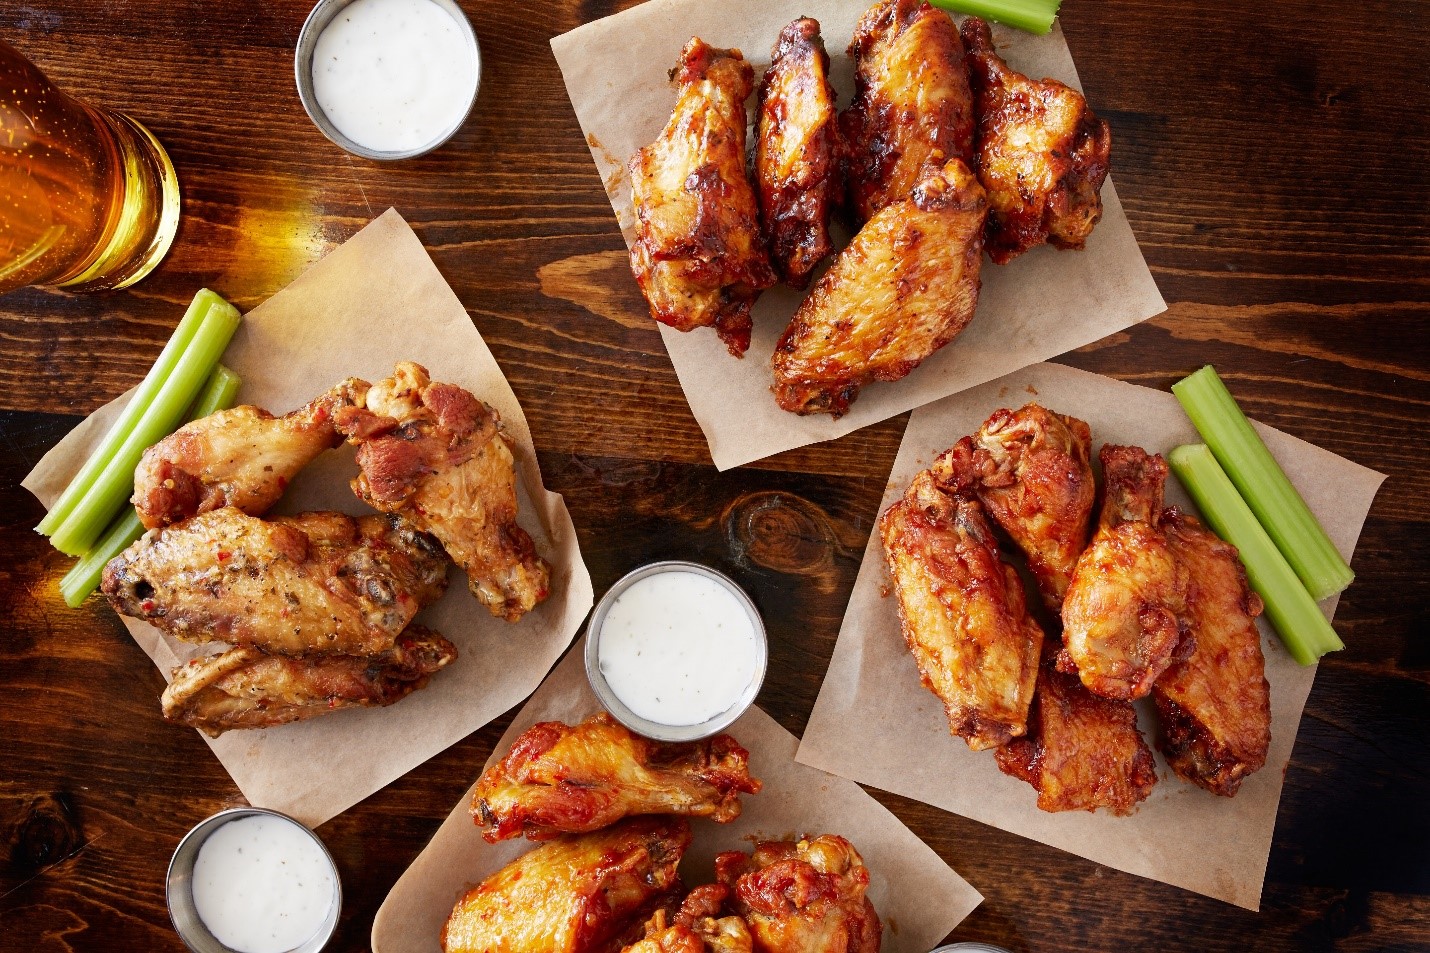 Enjoy the NY Best Wings Festival at Mulcahy’s Pub & Concert Hall July 30th